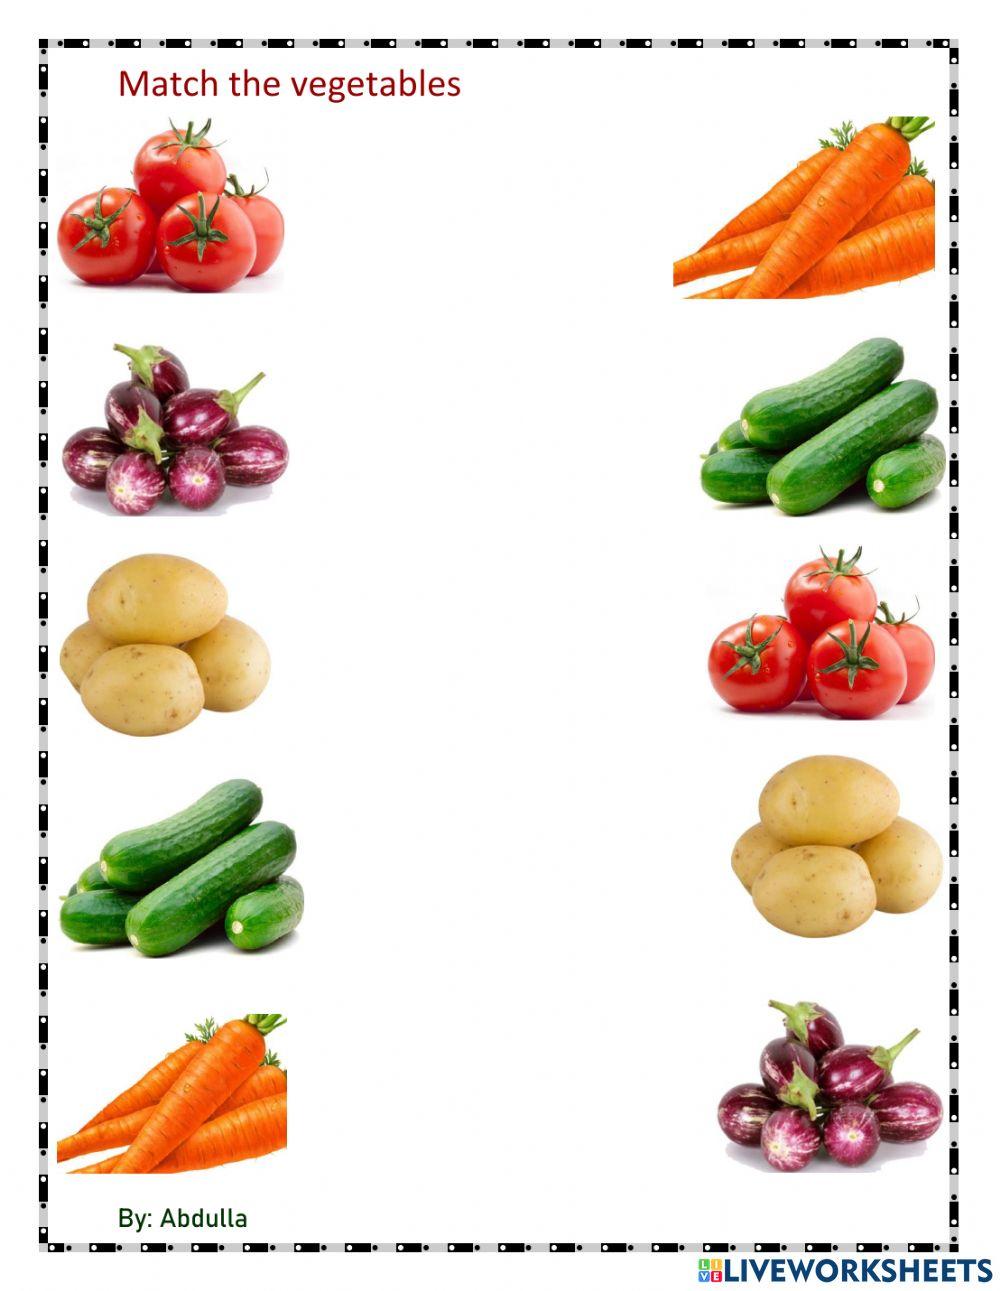 Match the vegetables